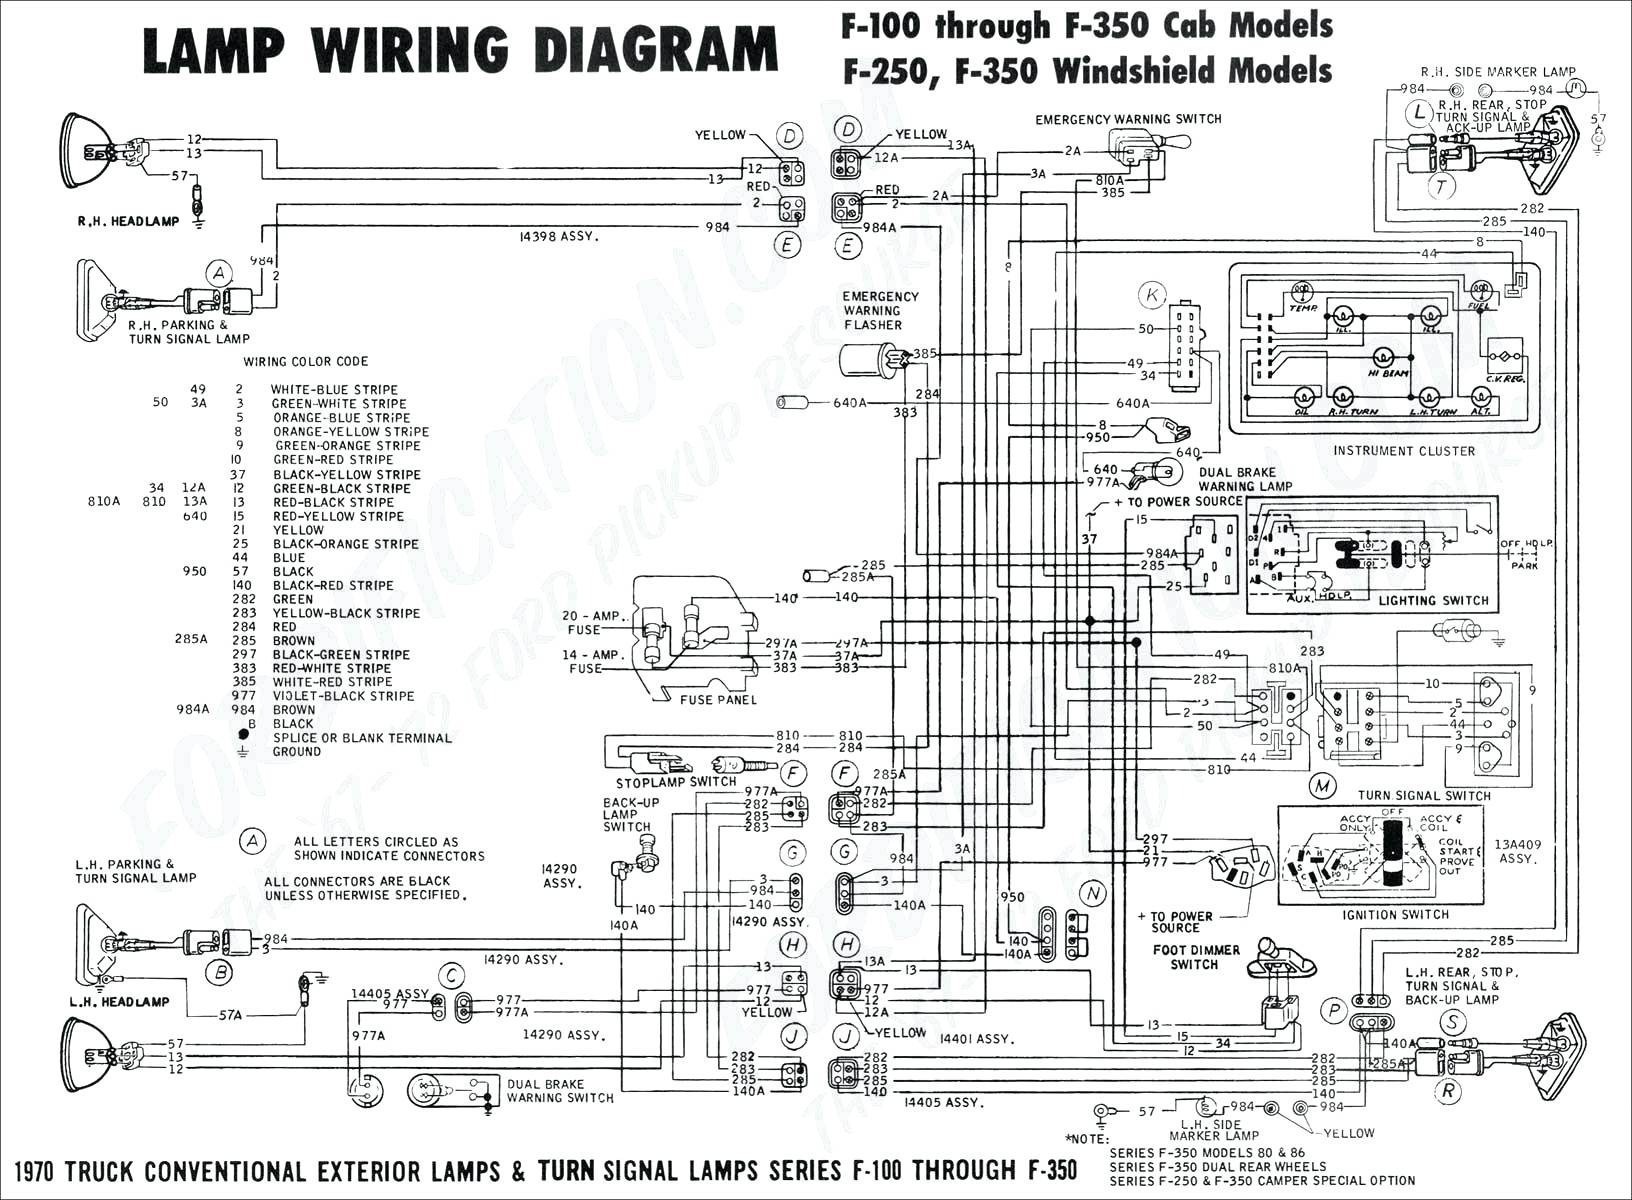 Wiring Diagrams for Utility Trailer Valid Trailer Light Wiring Diagram Utility Trailer Wiring Diagram